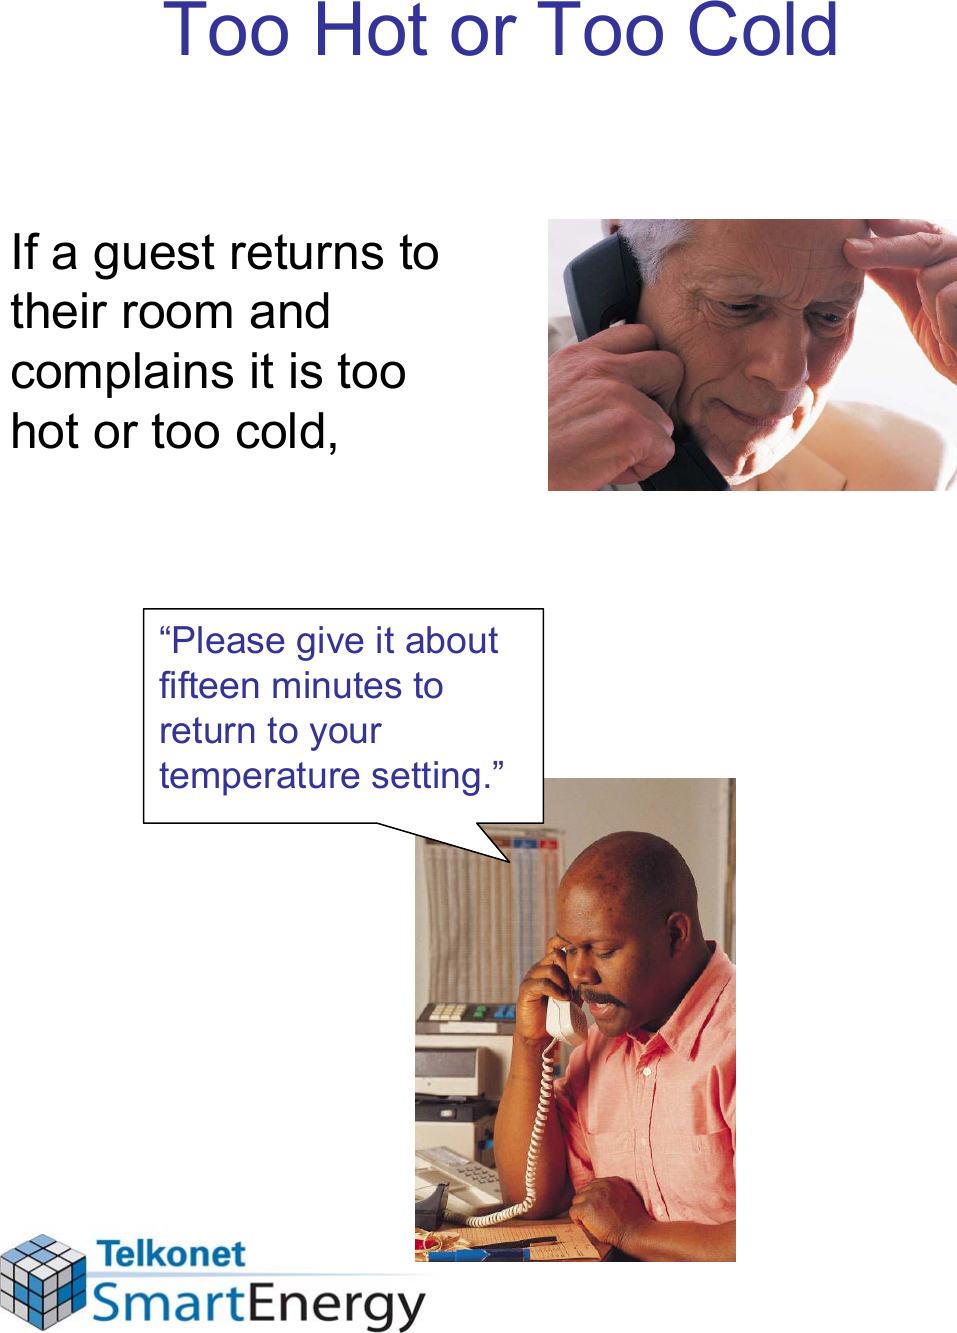 Too Hot or Too ColdIf a guest returns to their room and complains it is too hot or too cold,“Please give it about fifteen minutes to return to your temperature setting.”